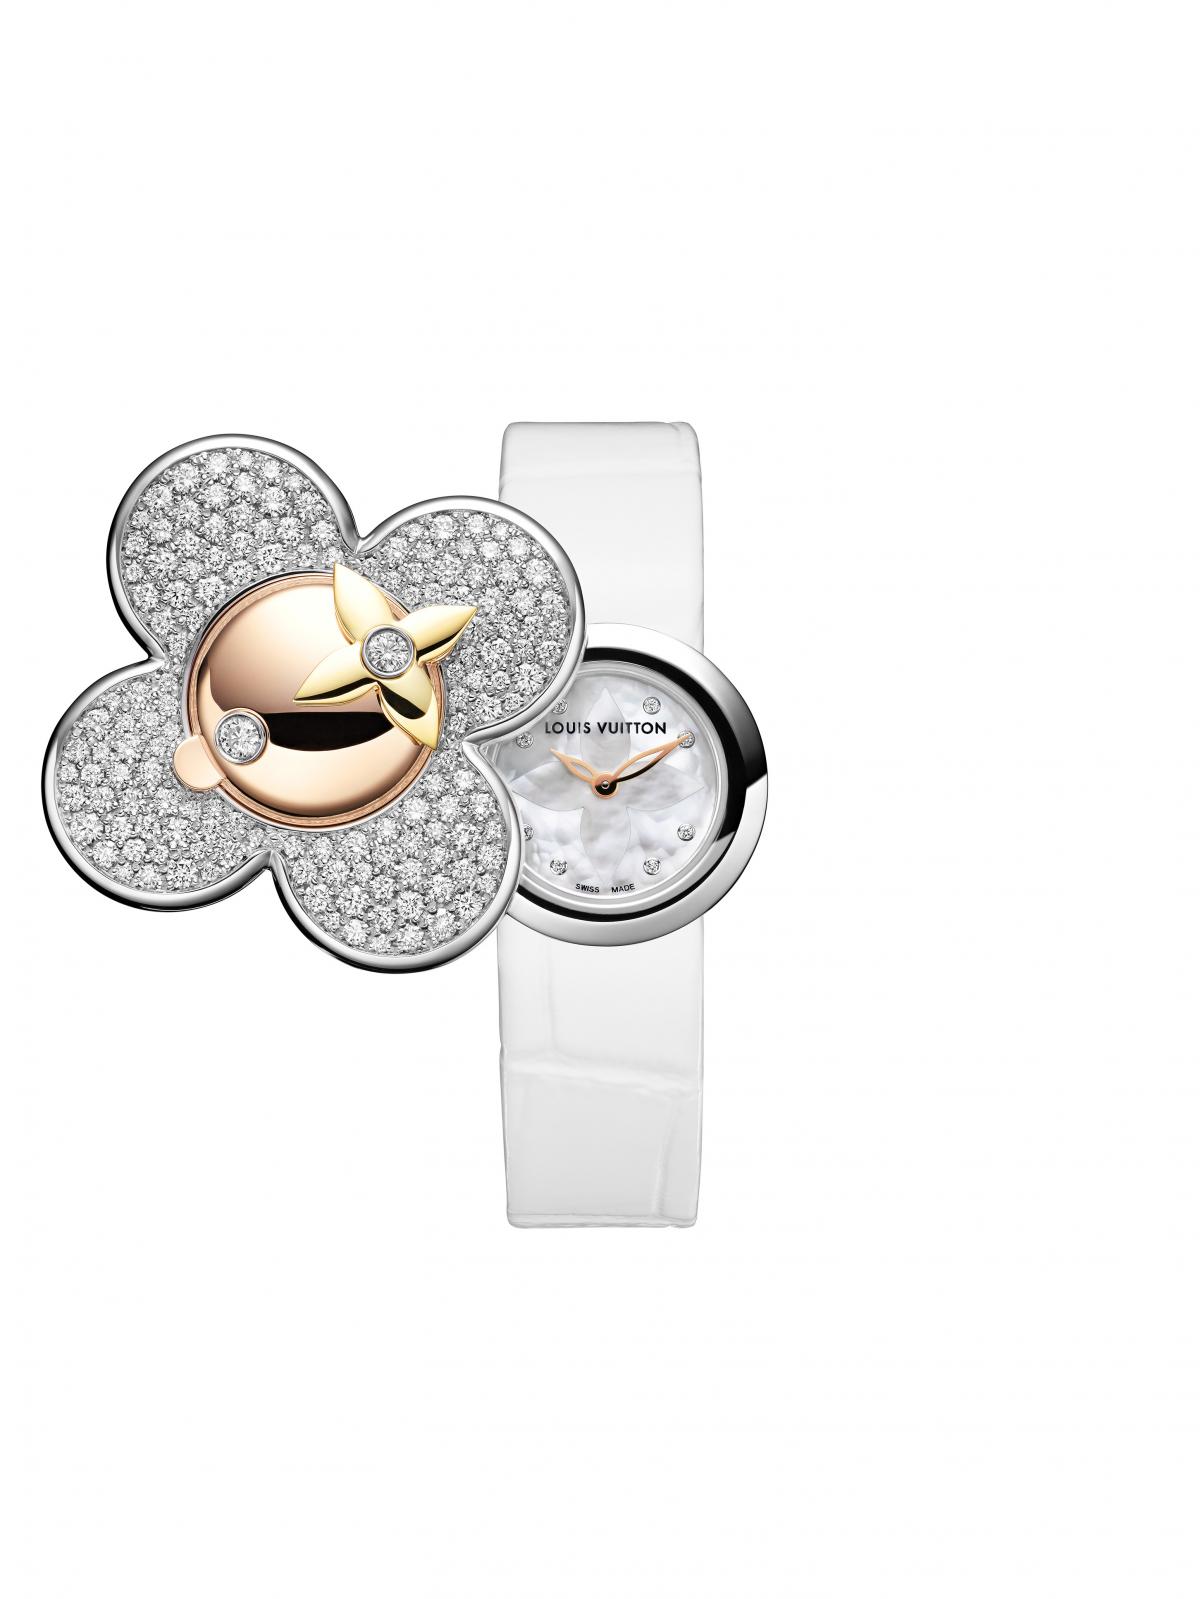 Louis Vuitton bring back mascot Vivienne for new Tambour watches